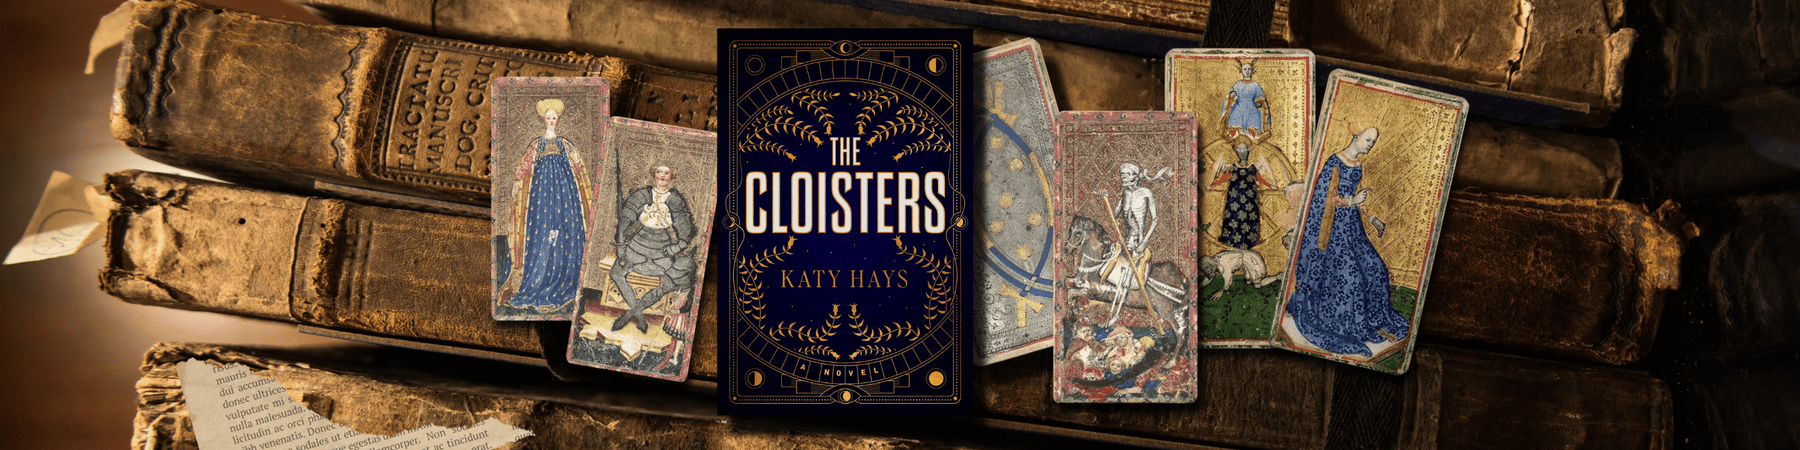 Musings on the The Cloisters by Katy Hays